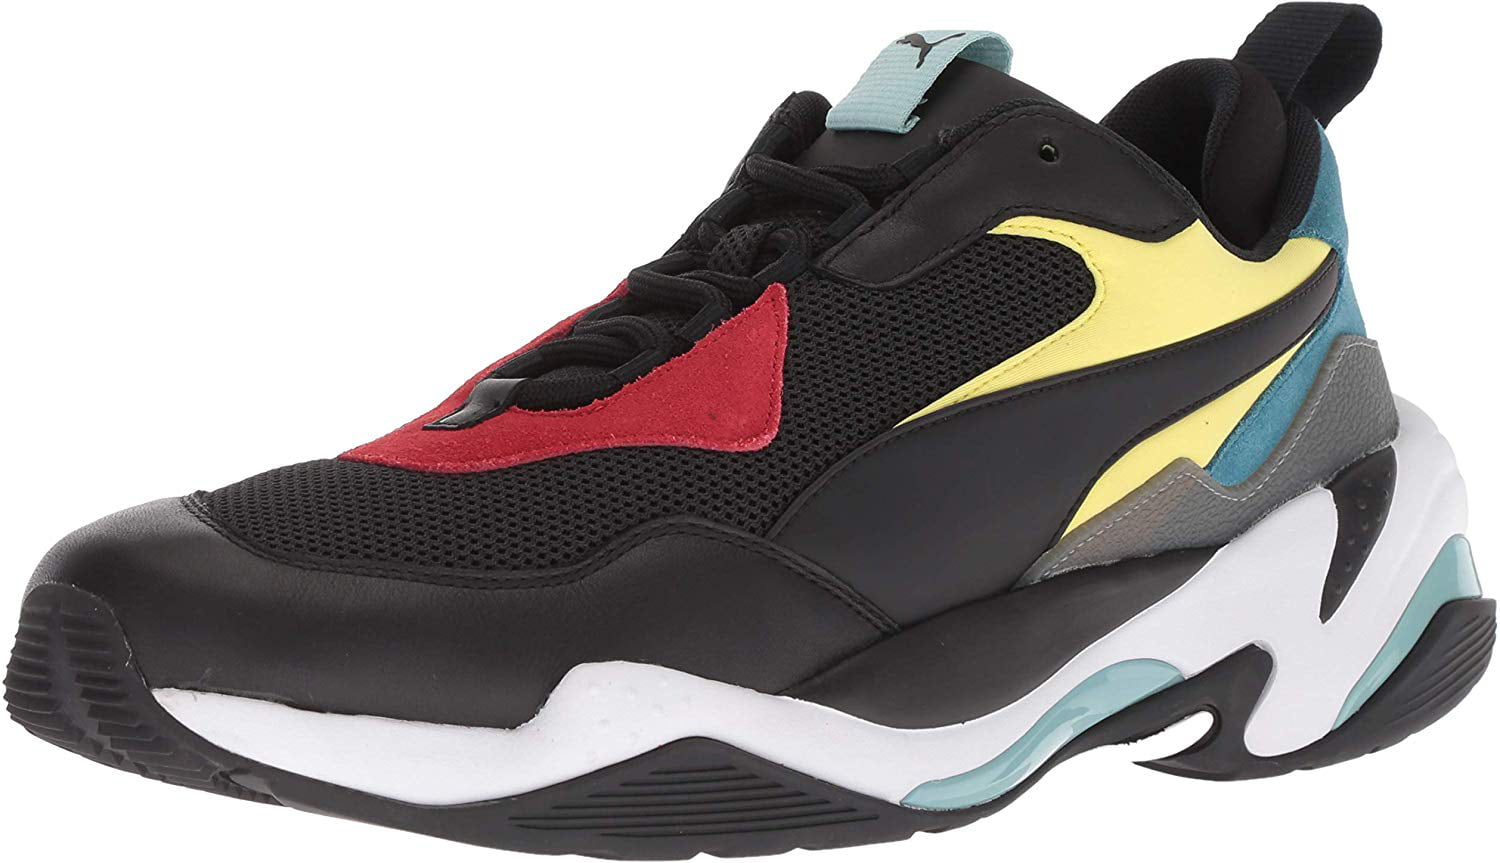 thunder spectra sneakers puma